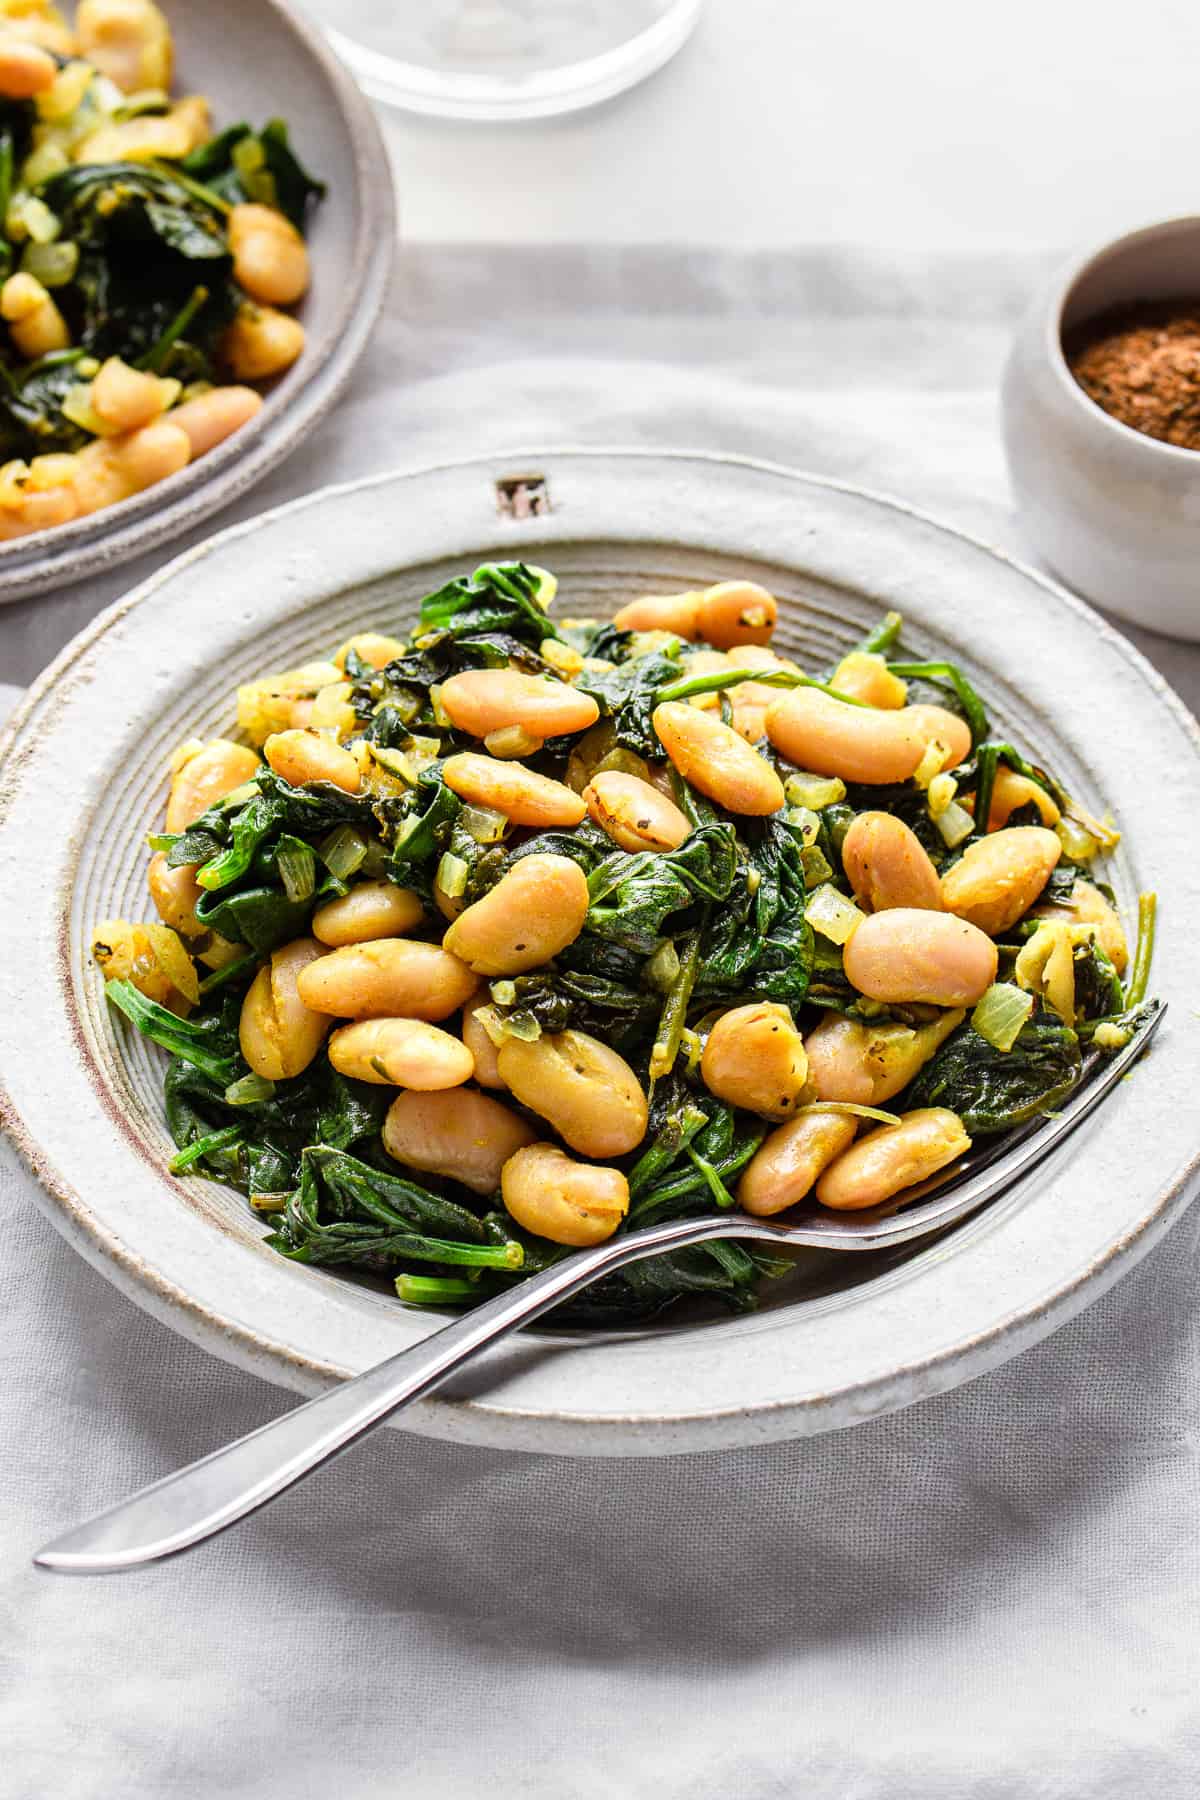 Lemon spinach white beans on a grey ceramic plate with an antique fork.